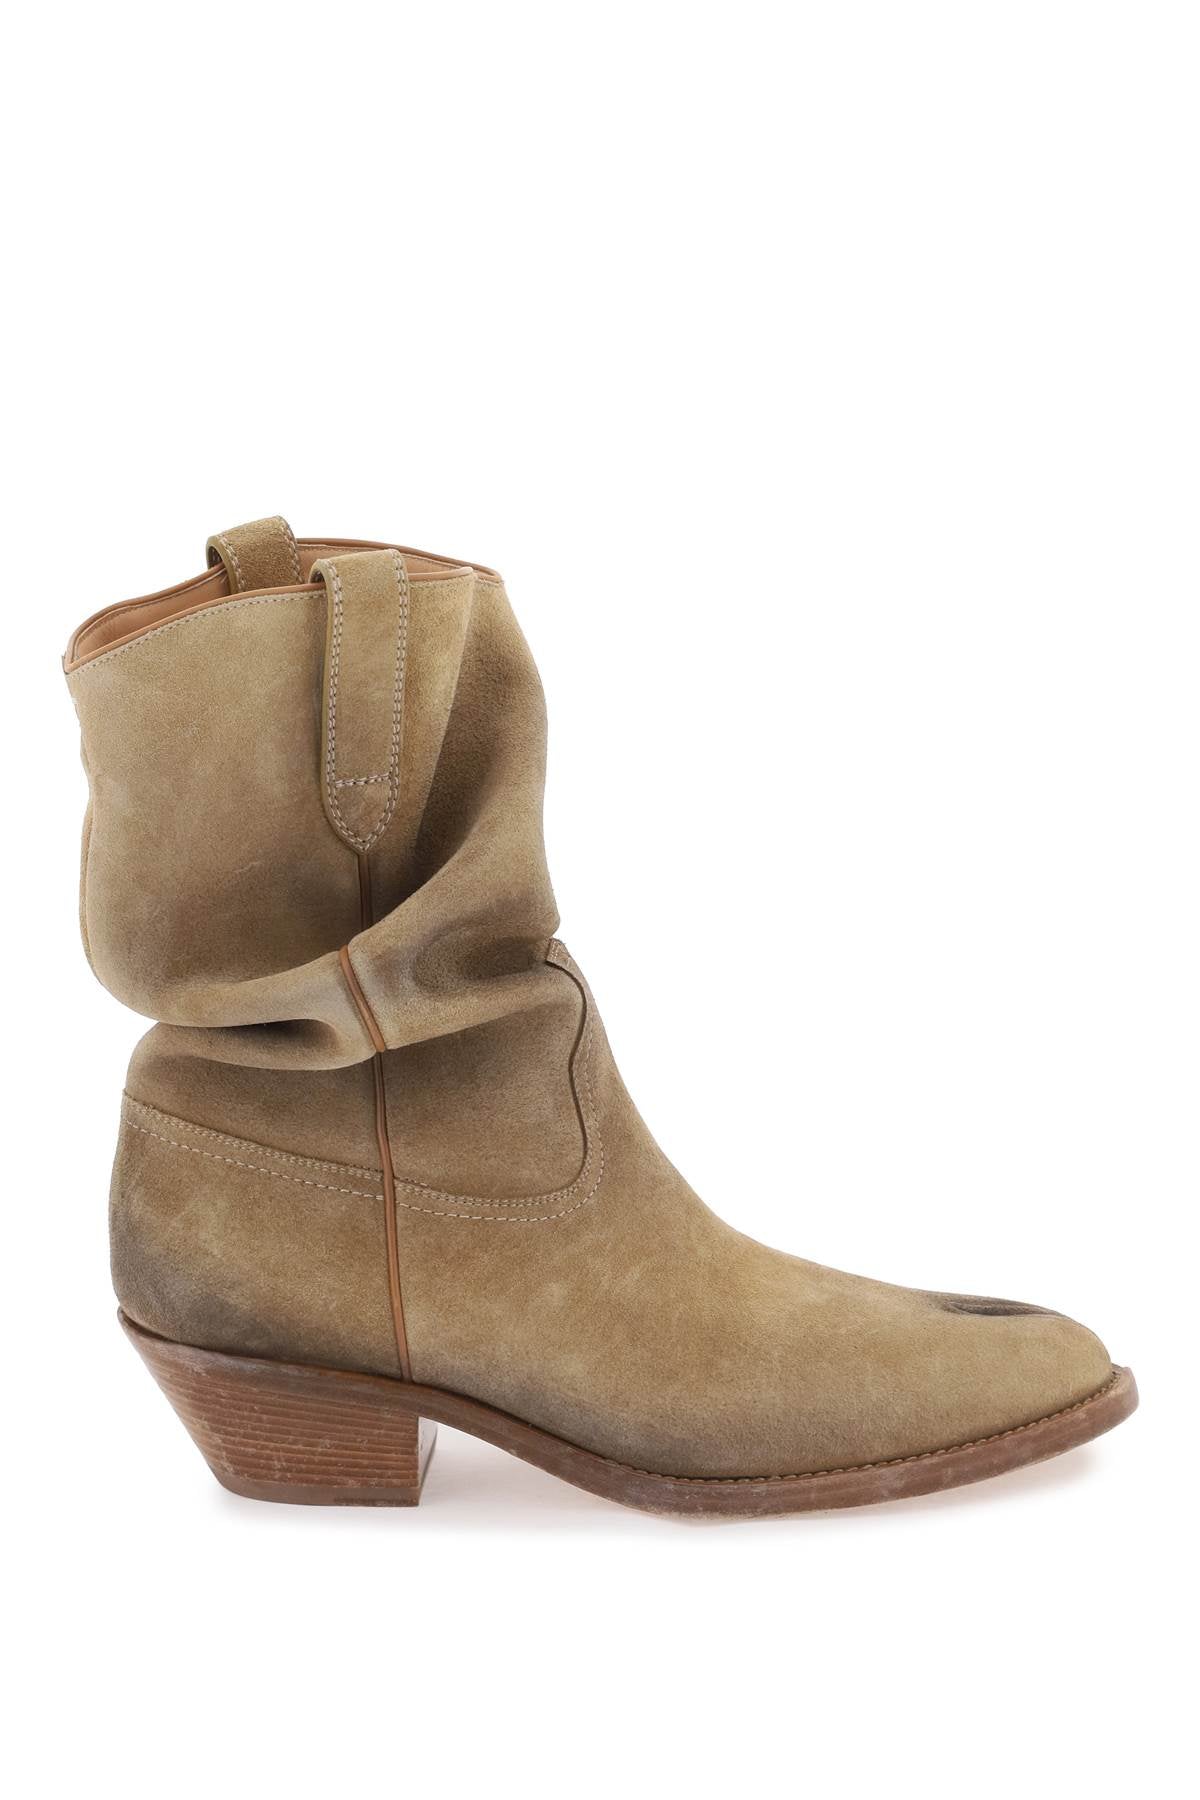 MAISON MARGIELA Handcrafted Neutral Suede Texan Tabi Boots for Men